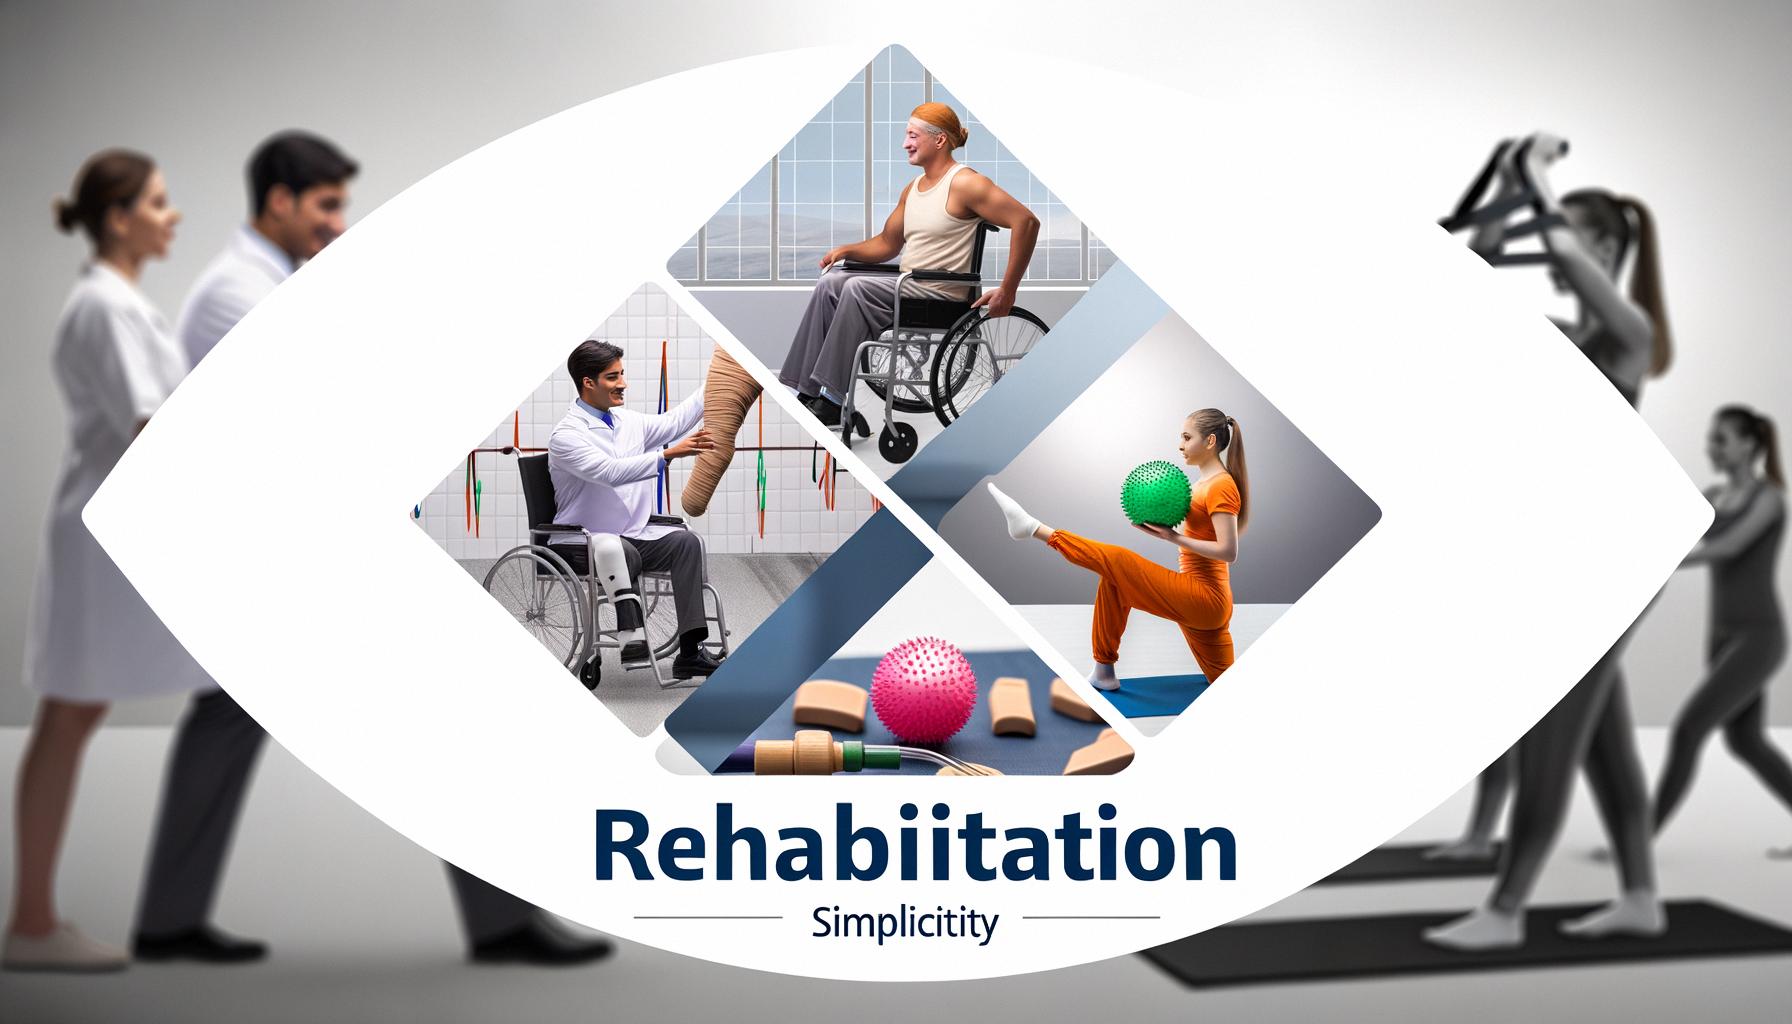 Rehabilitation critically mitigates risks, improves functionality across diverse conditions